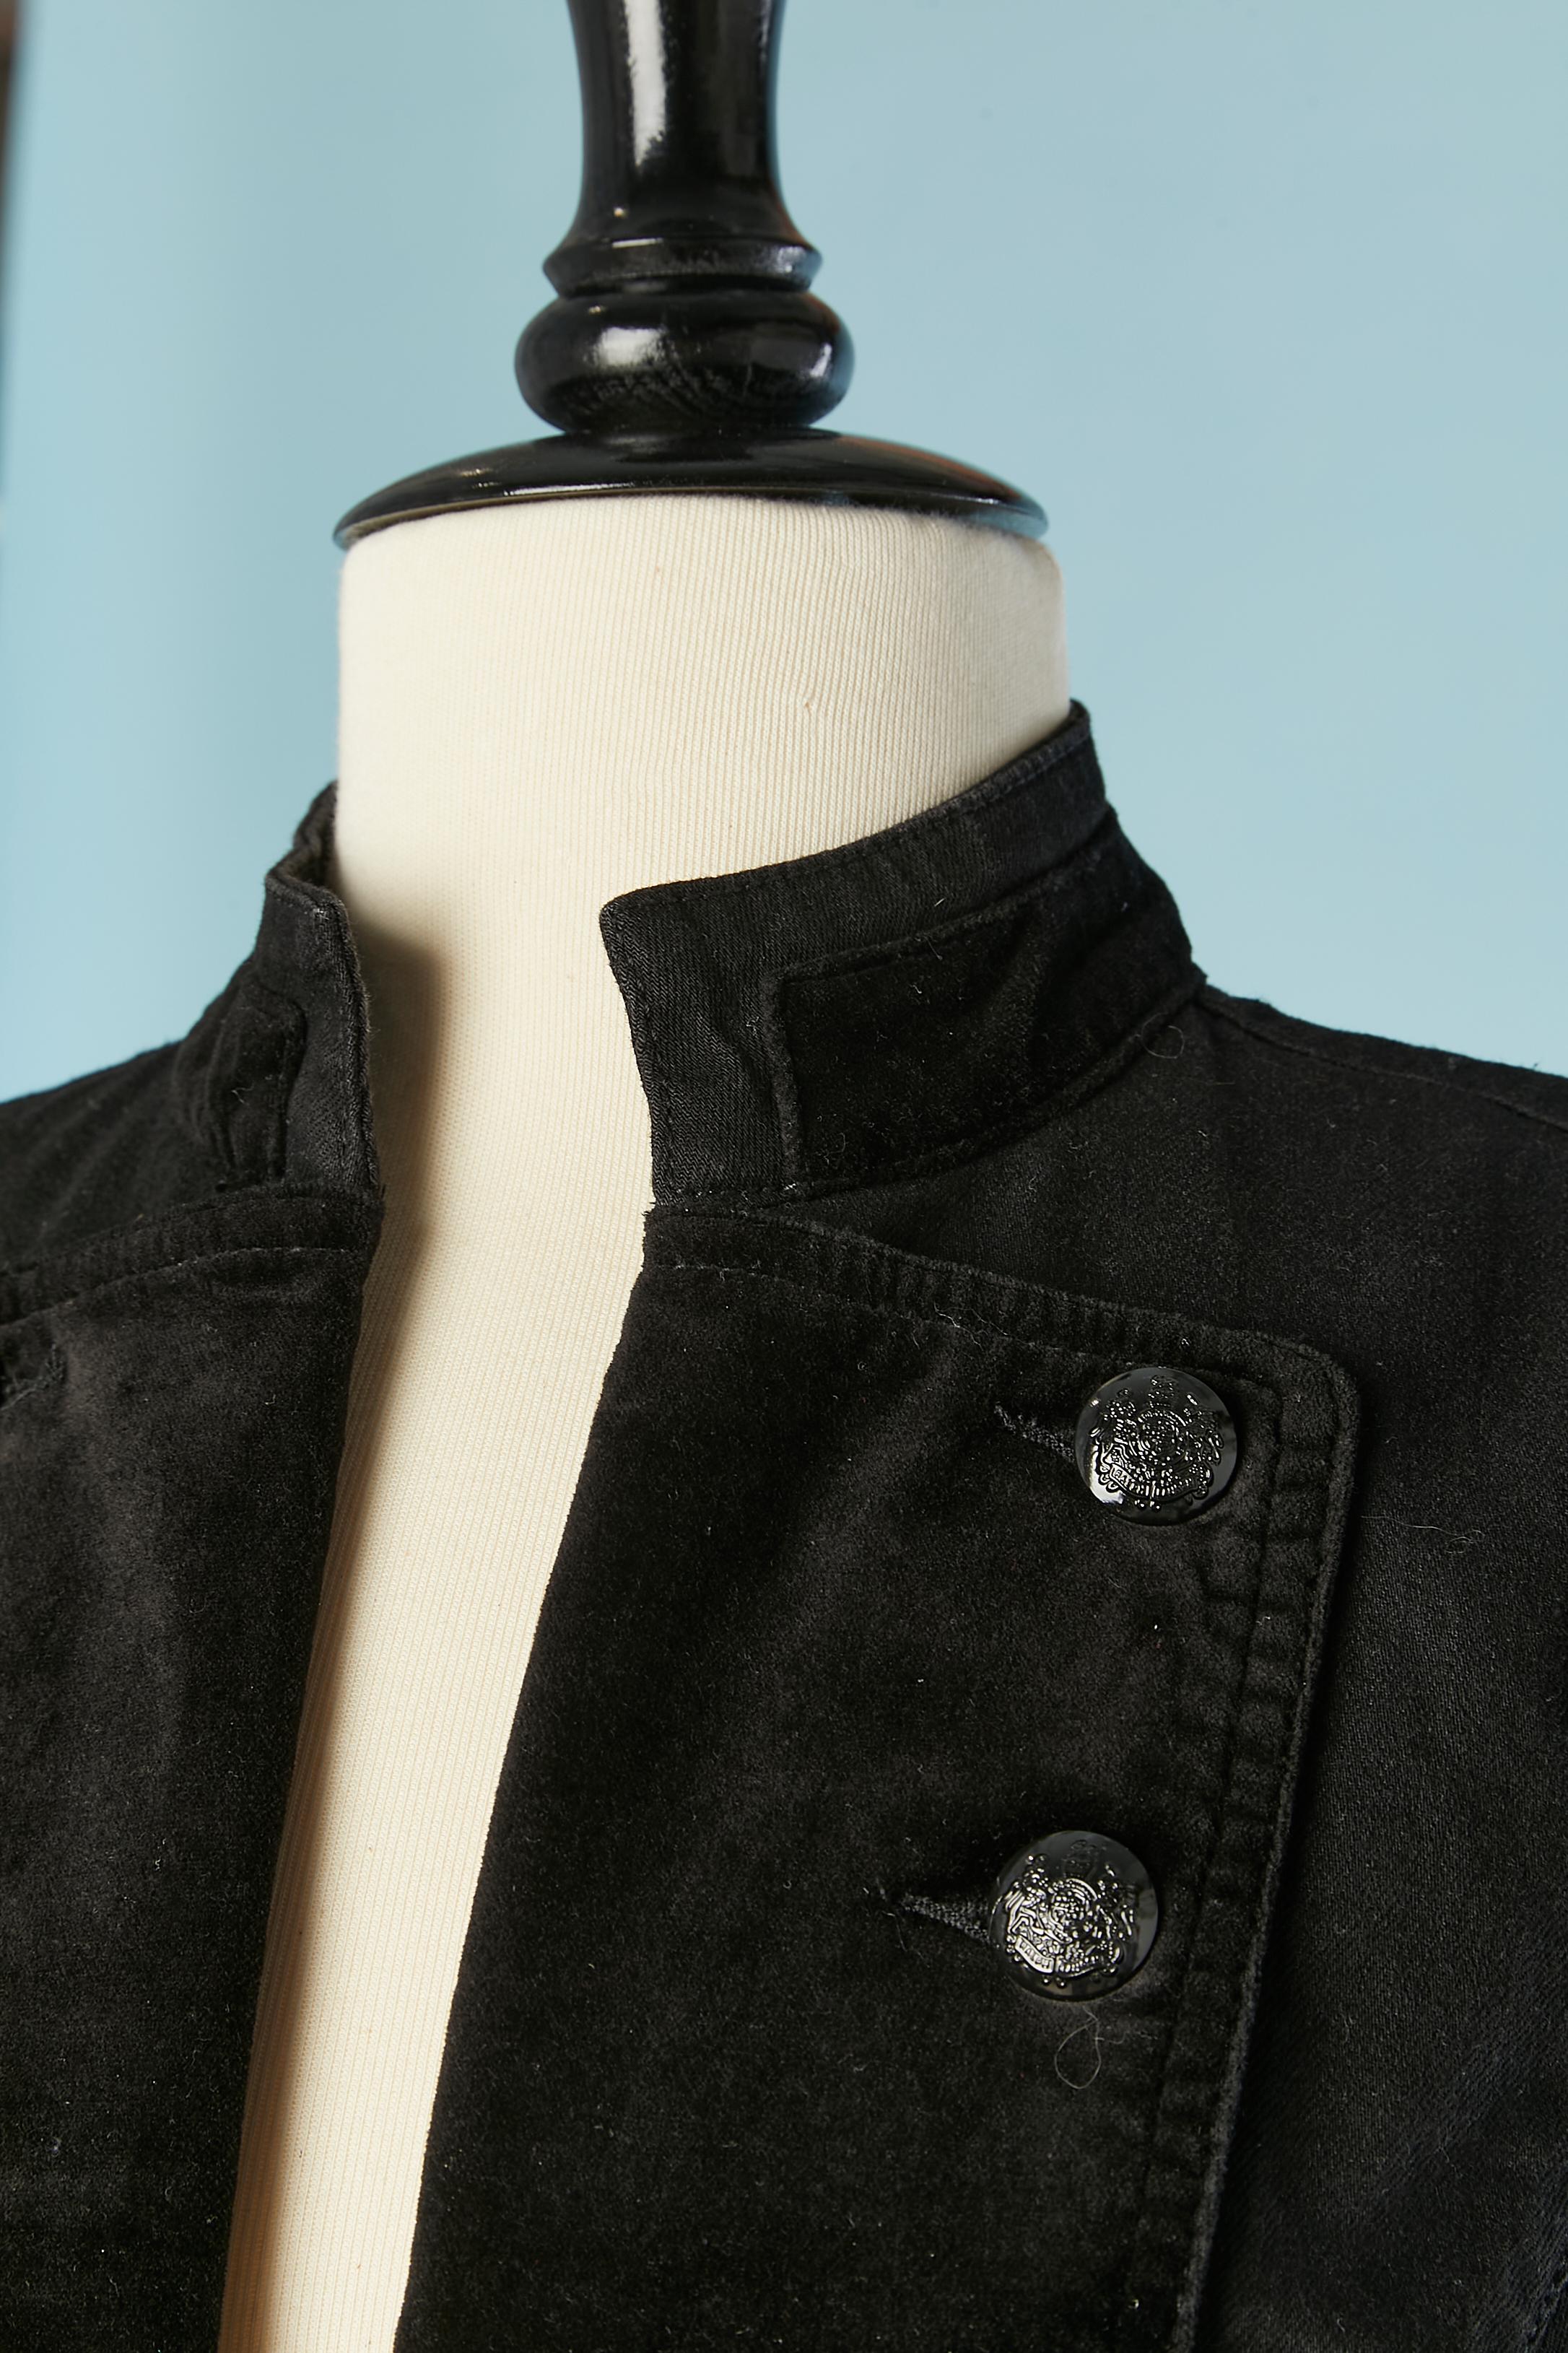 Cotton and velvet edge to edge officer jacket. Main fabric composition: 92% cotton, 7% polyester. Trim ( velvet) 98% cotton, 2% stretch. Cutwork on the bust. 
Decorative buttons and buttonhole 
SIZE 2 (Us) XS ( but fit S)